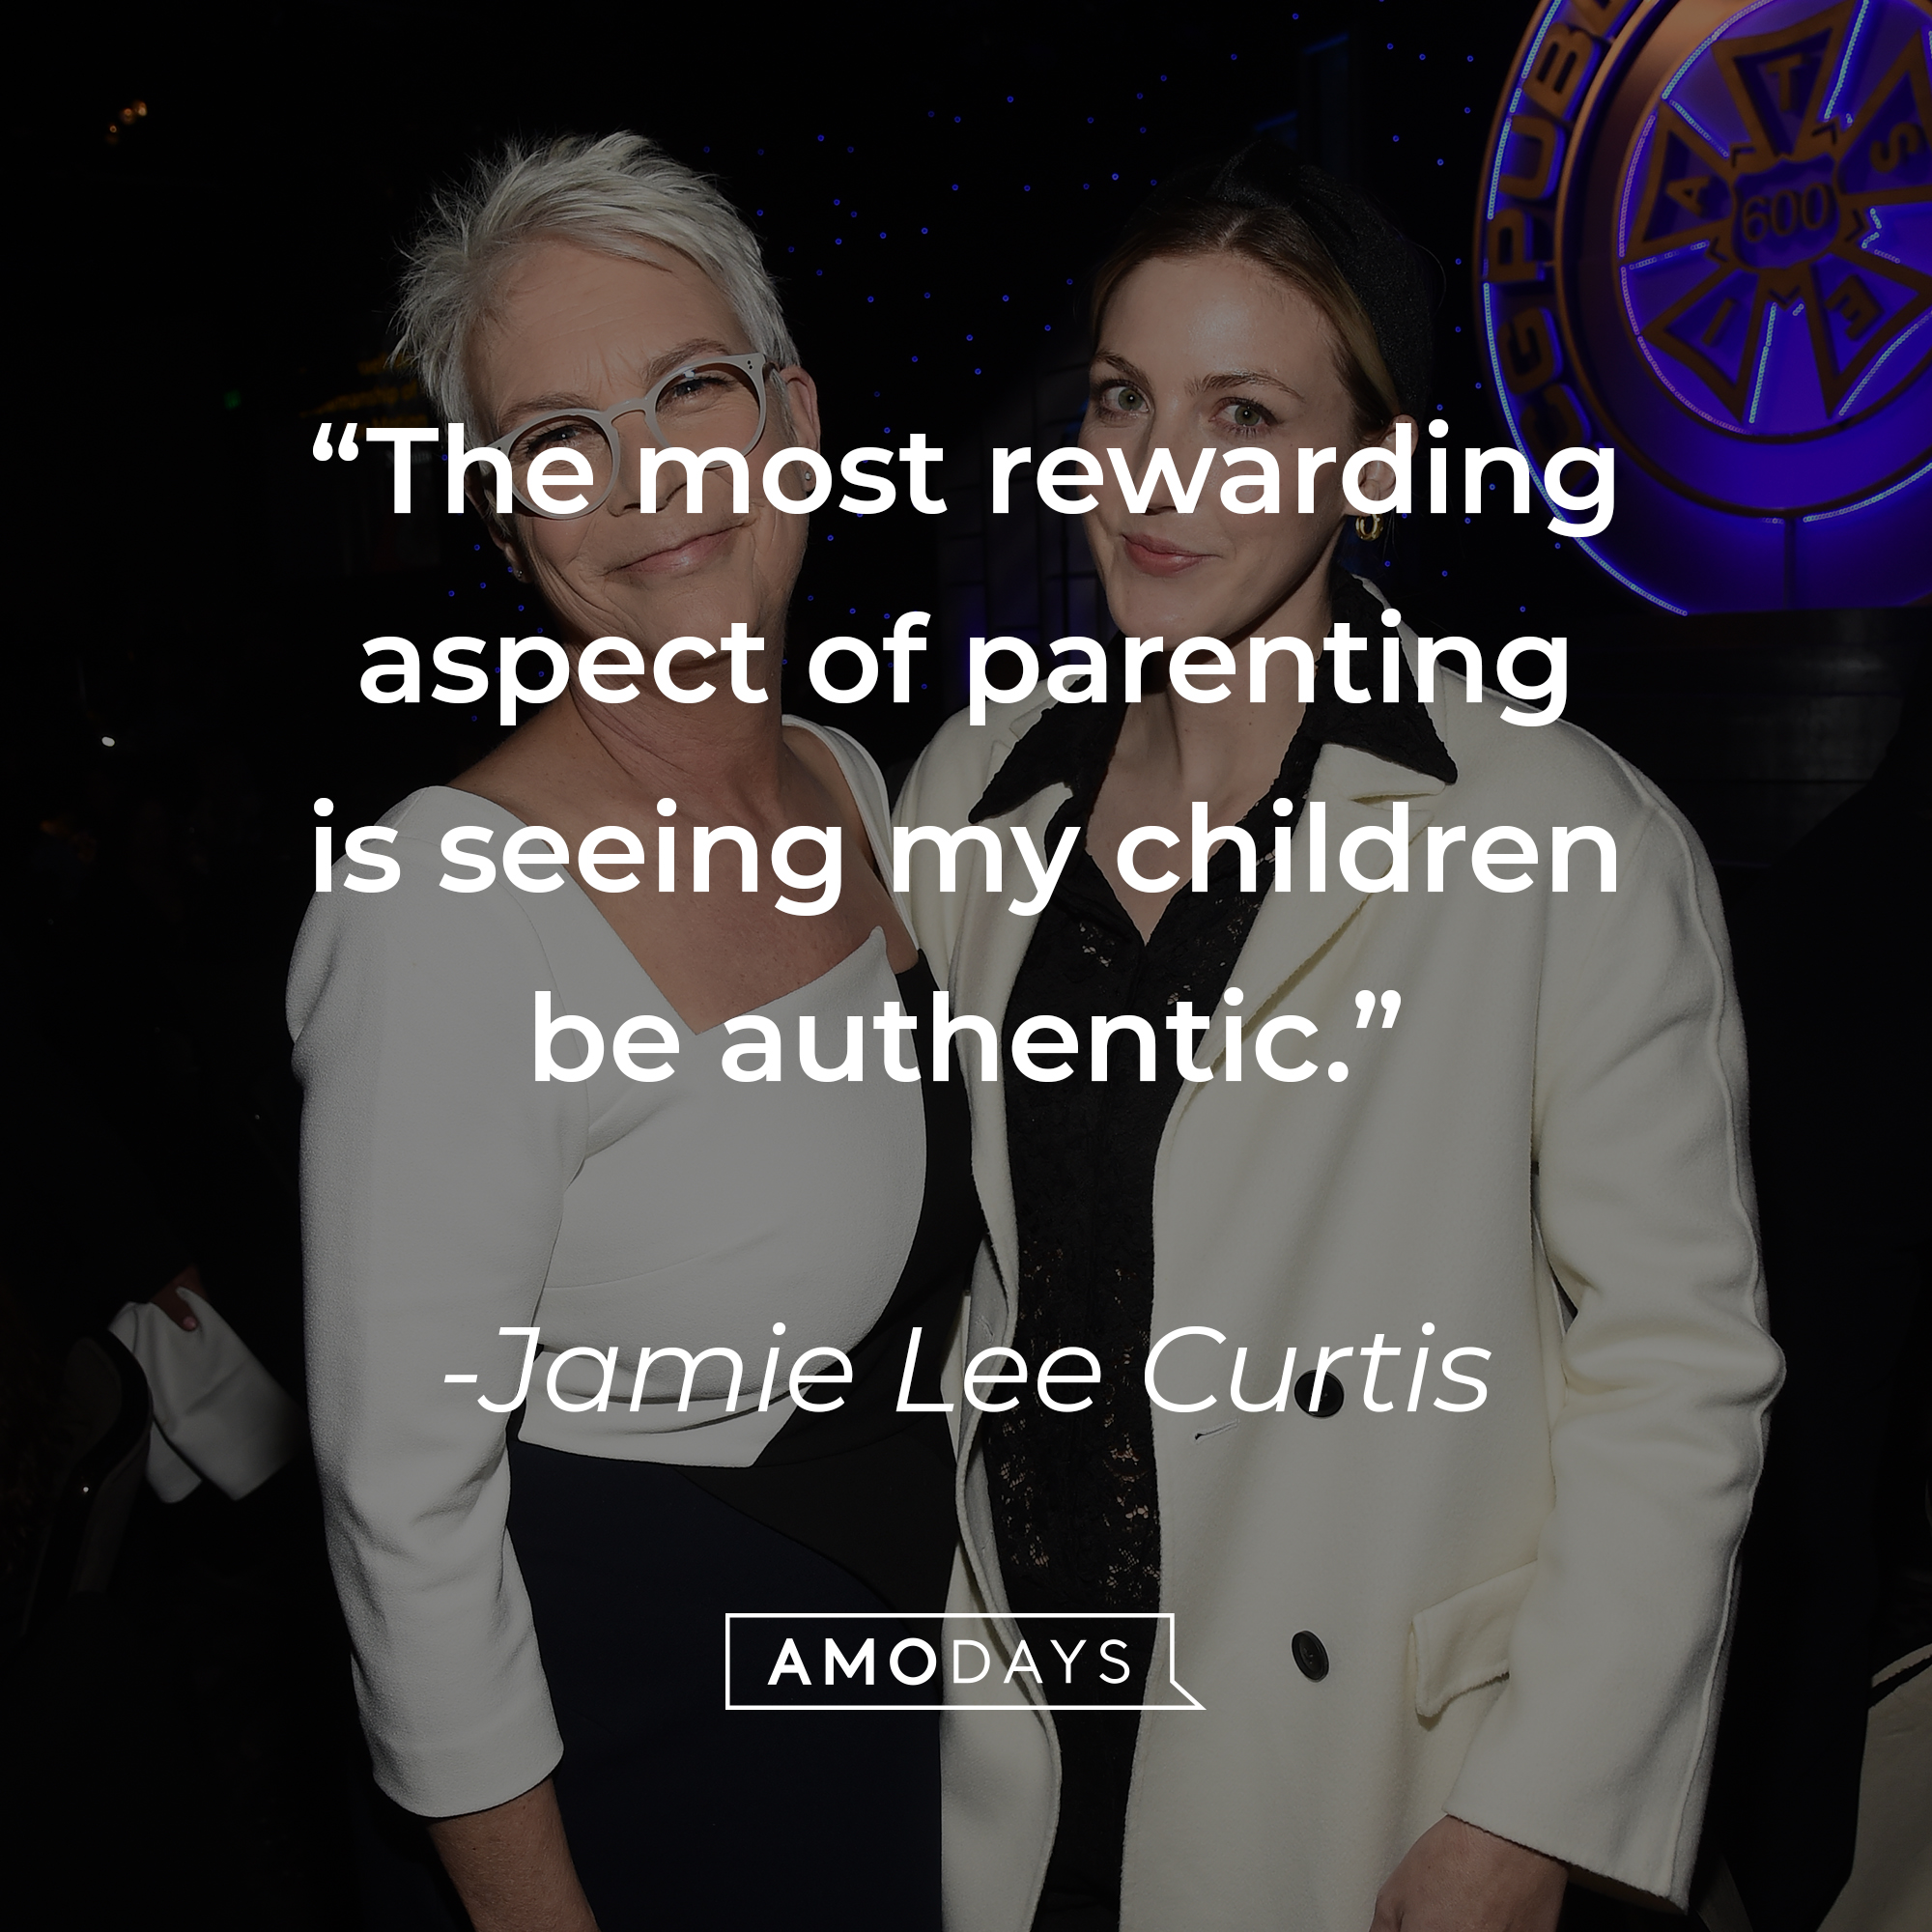 An image of Jamie Lee Curtis, with her quote: "The most rewarding aspect of parenting is seeing my children be authentic.”  | Source: Getty Images